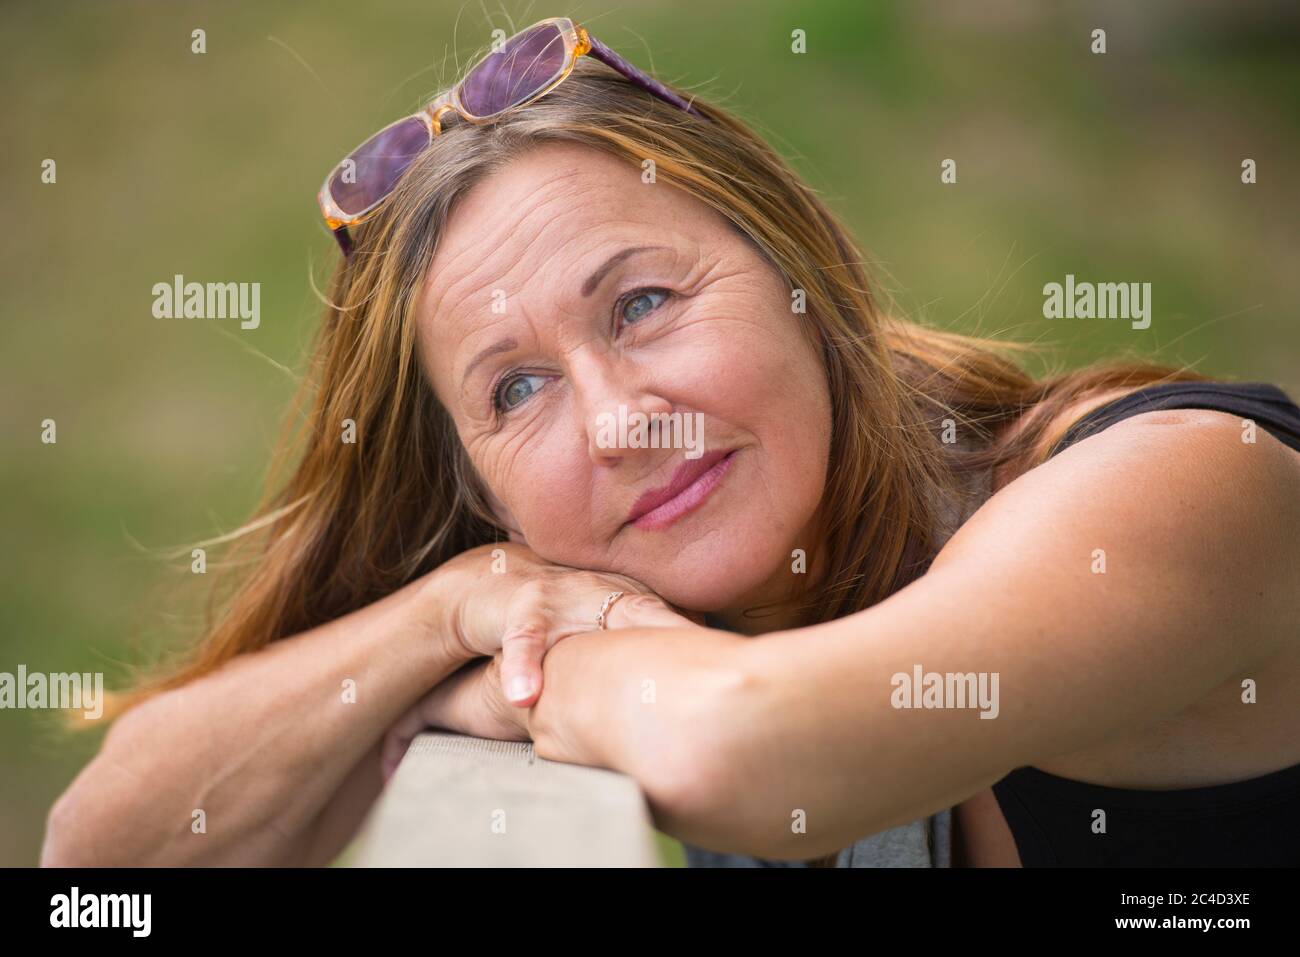 Portrait attractive mature woman posing laid back and happy smiling outdoor with sunglasses, green blurred background and copy space. Stock Photo